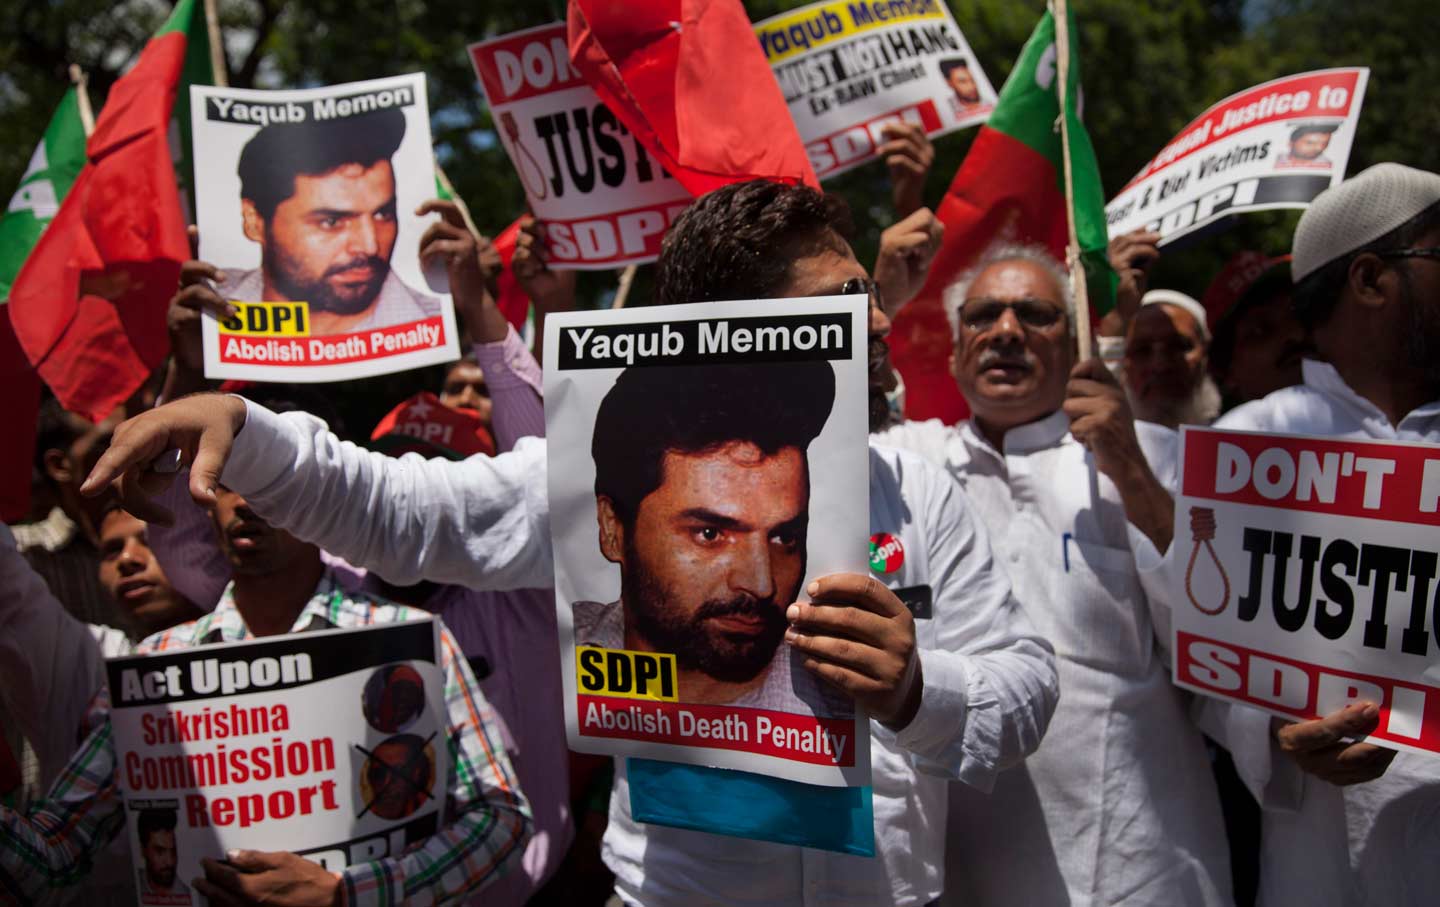 Social Democratic Party of India activists carrying placards with photographs of Yakub Memon, July 27, 2015.